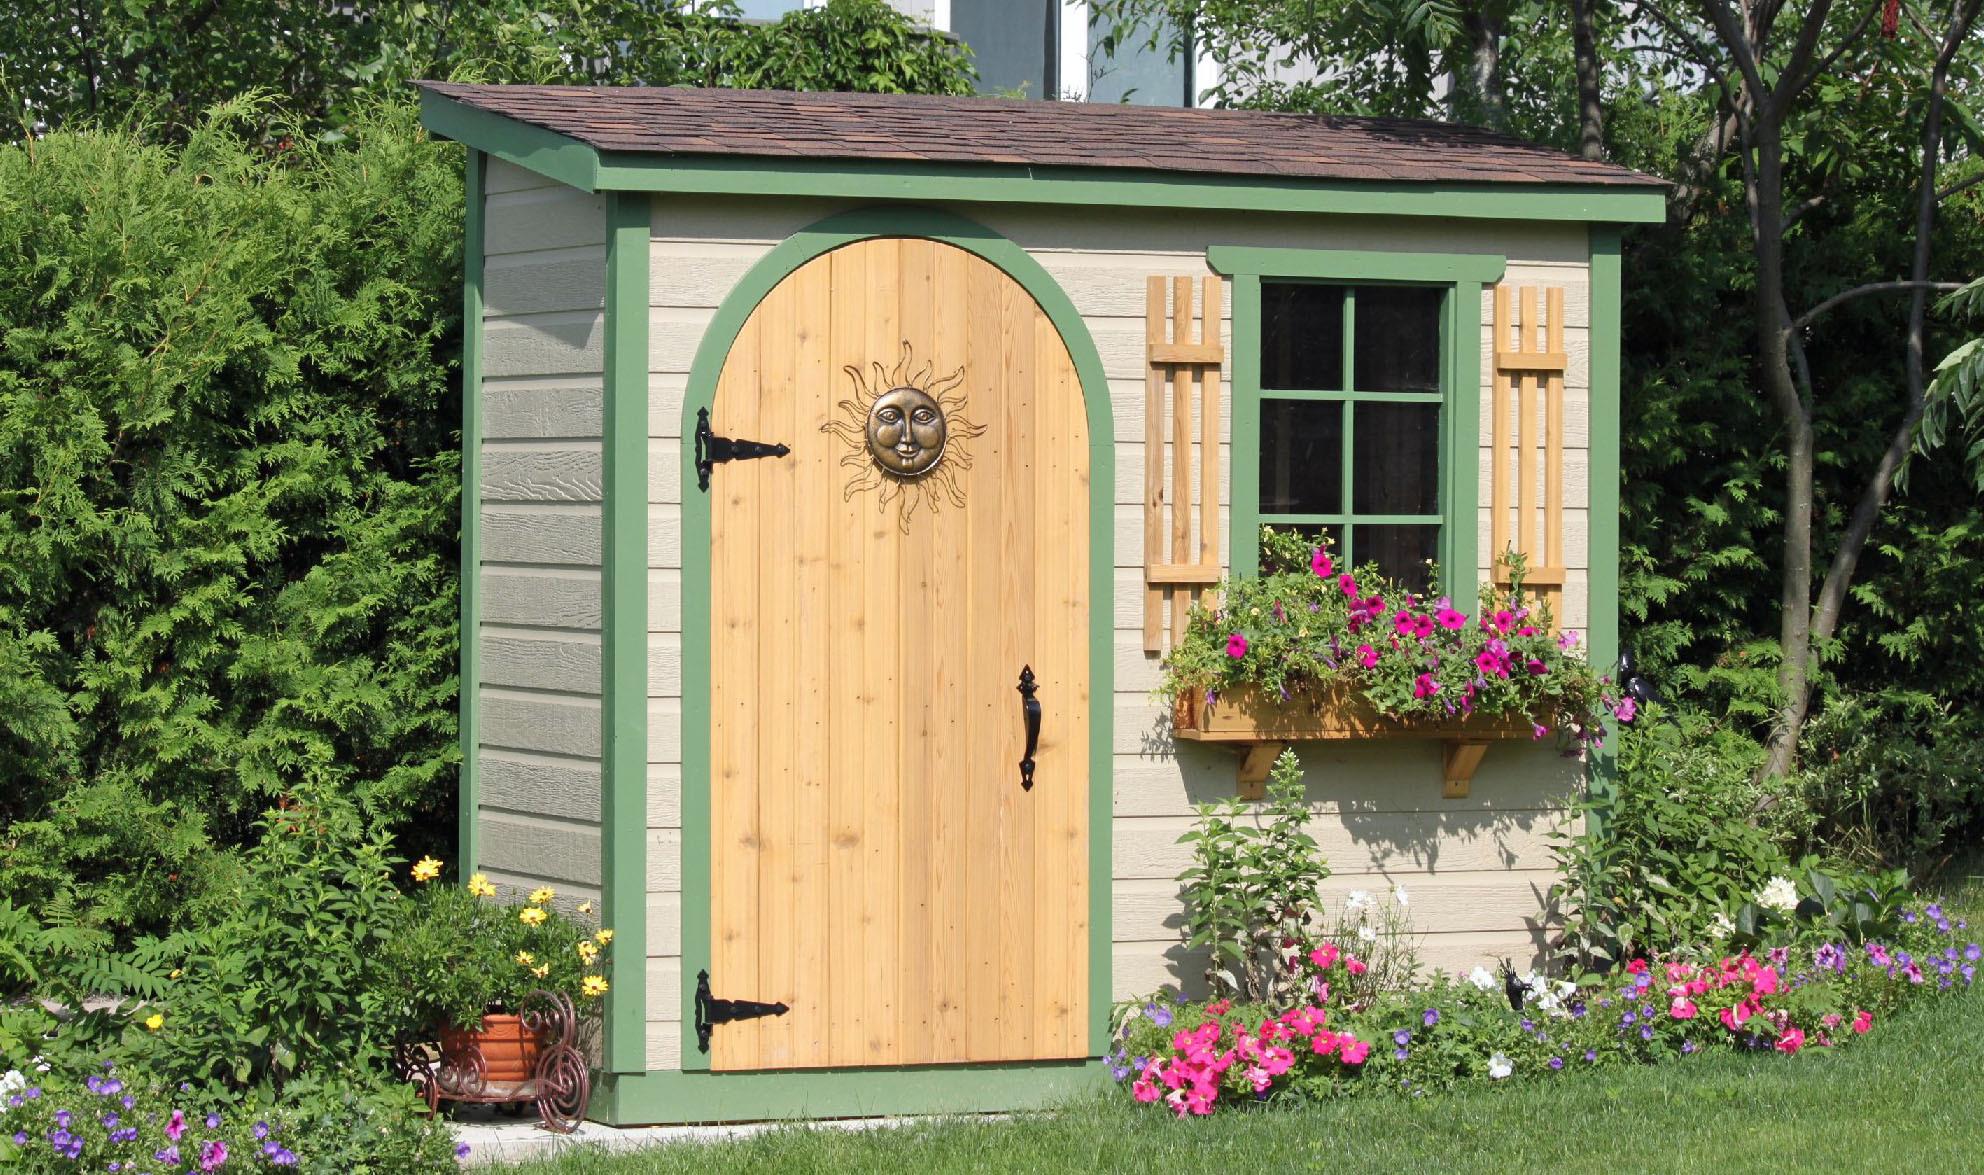 Canexel Sarawak shed 3x8 with arched single door in Nestleton, Ontario. ID number 115614-3